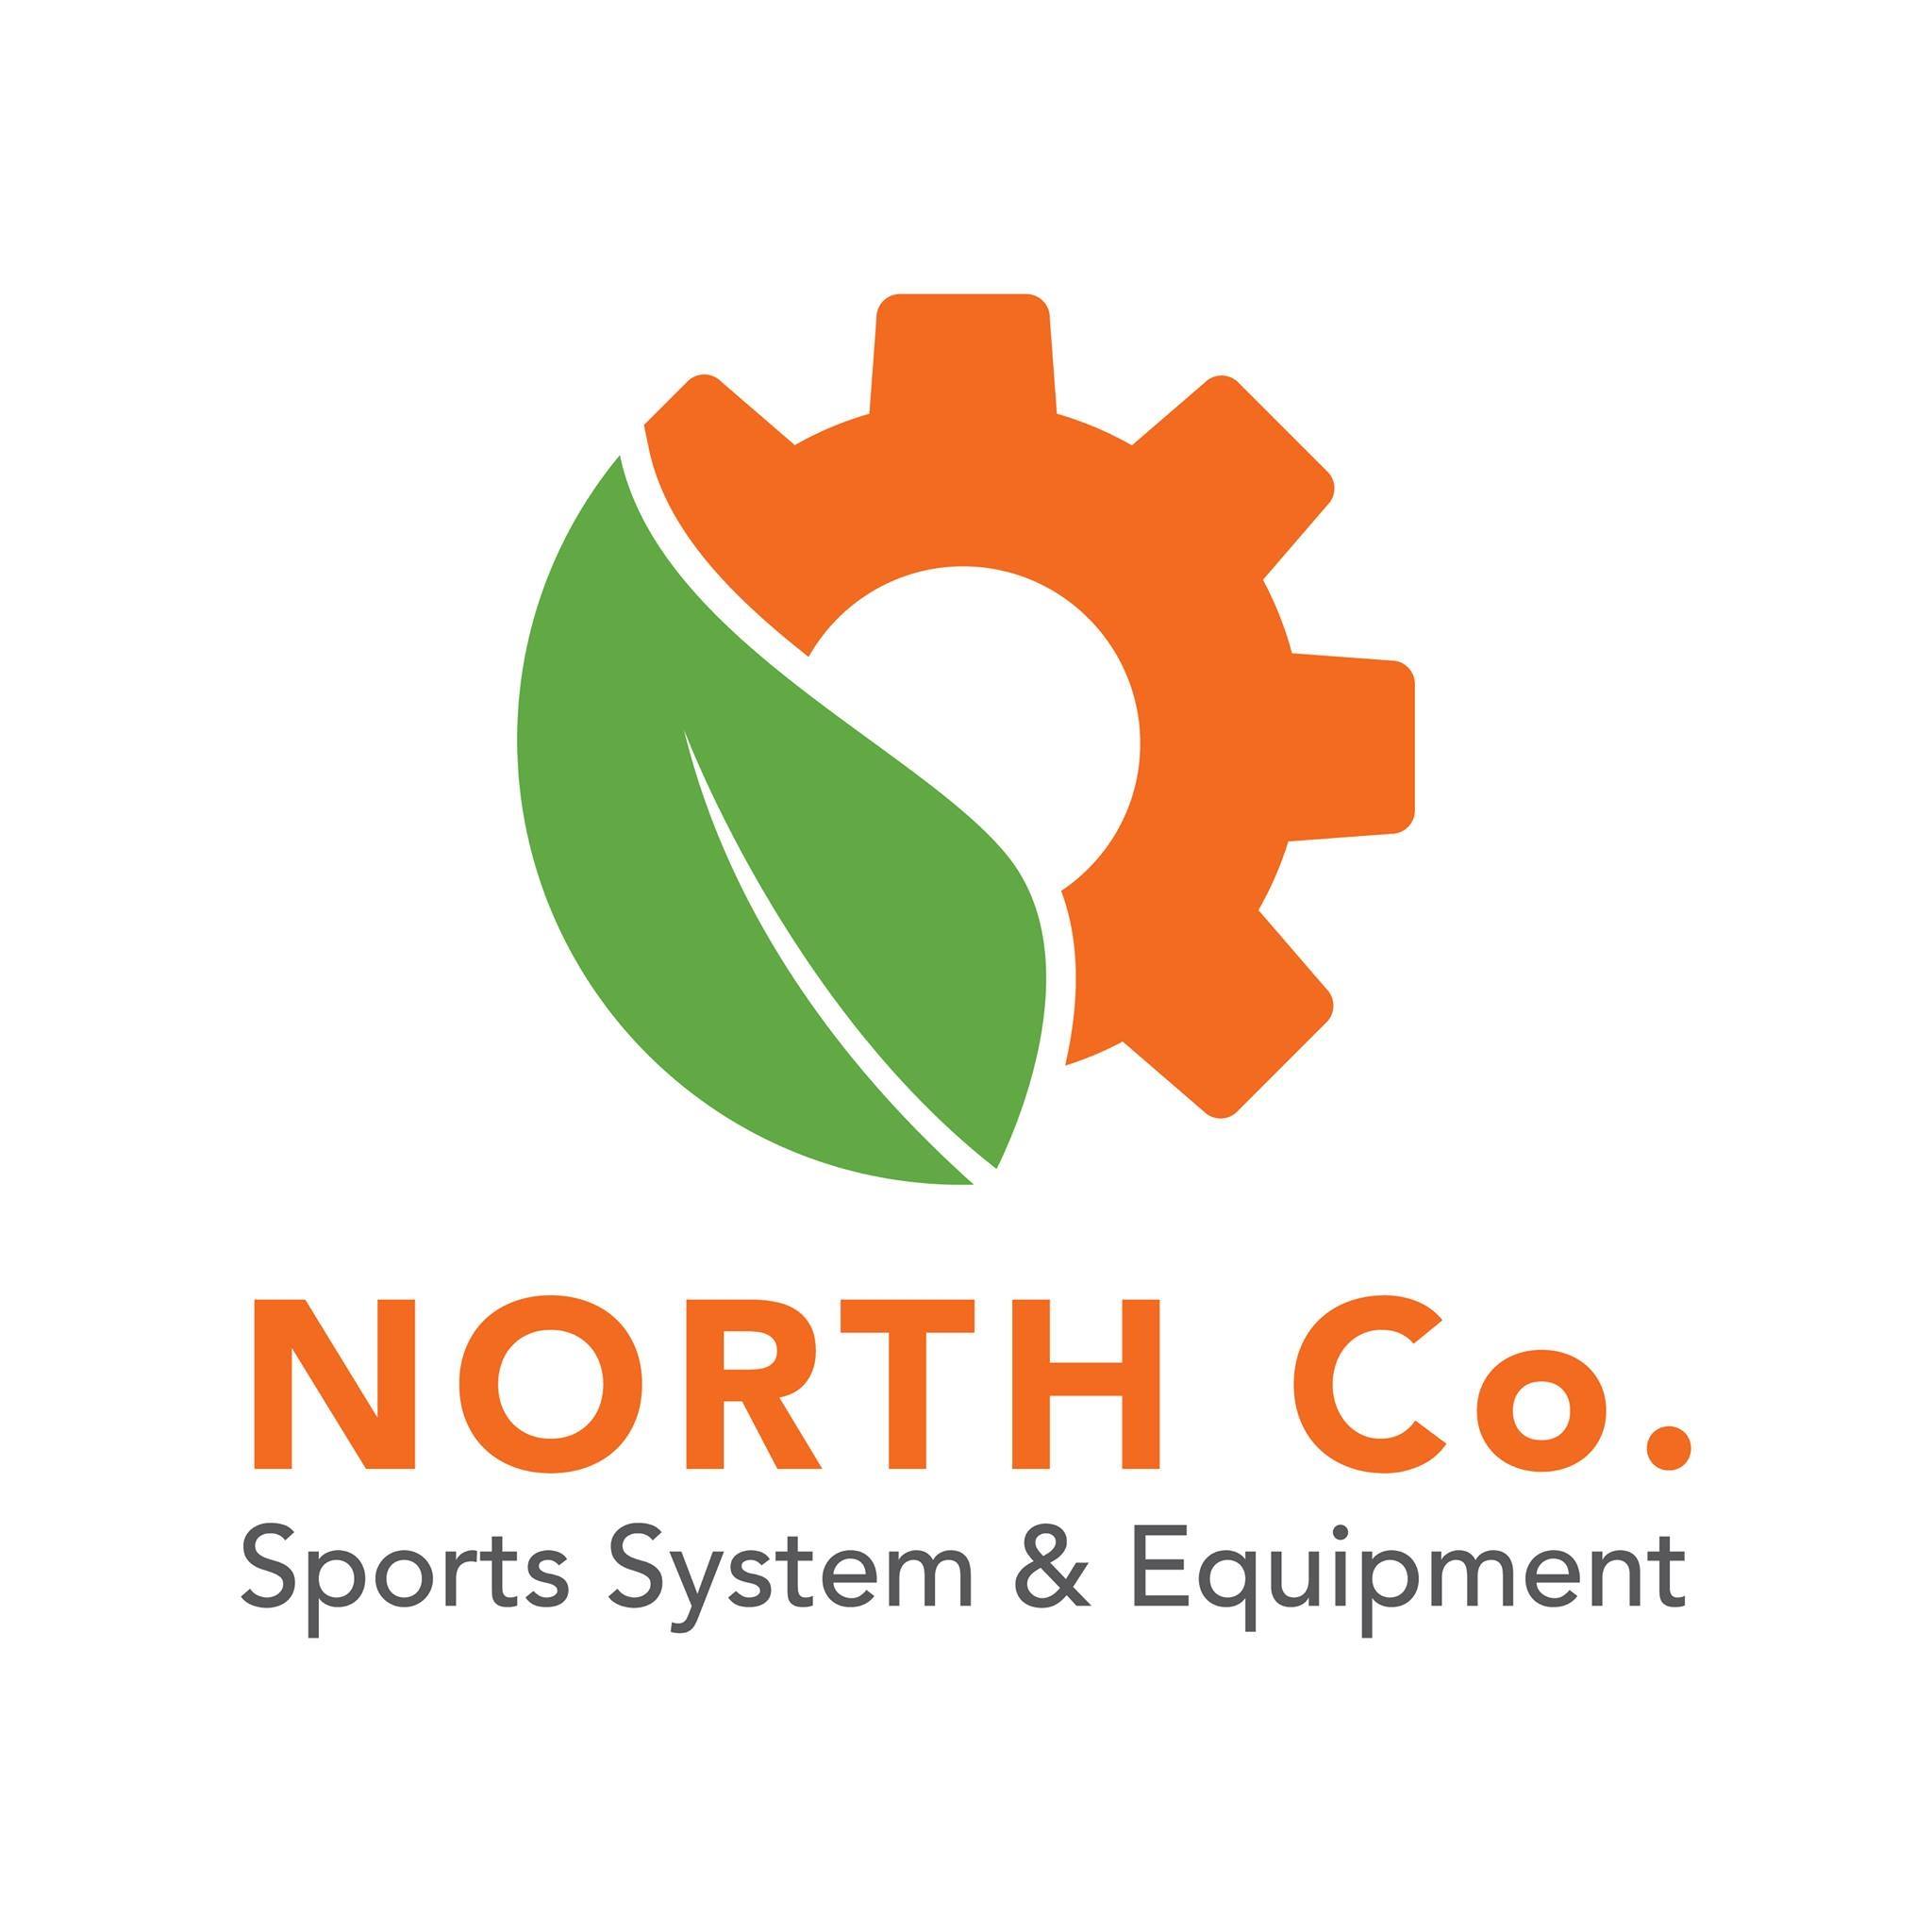 North Company For Sports System & Equipment